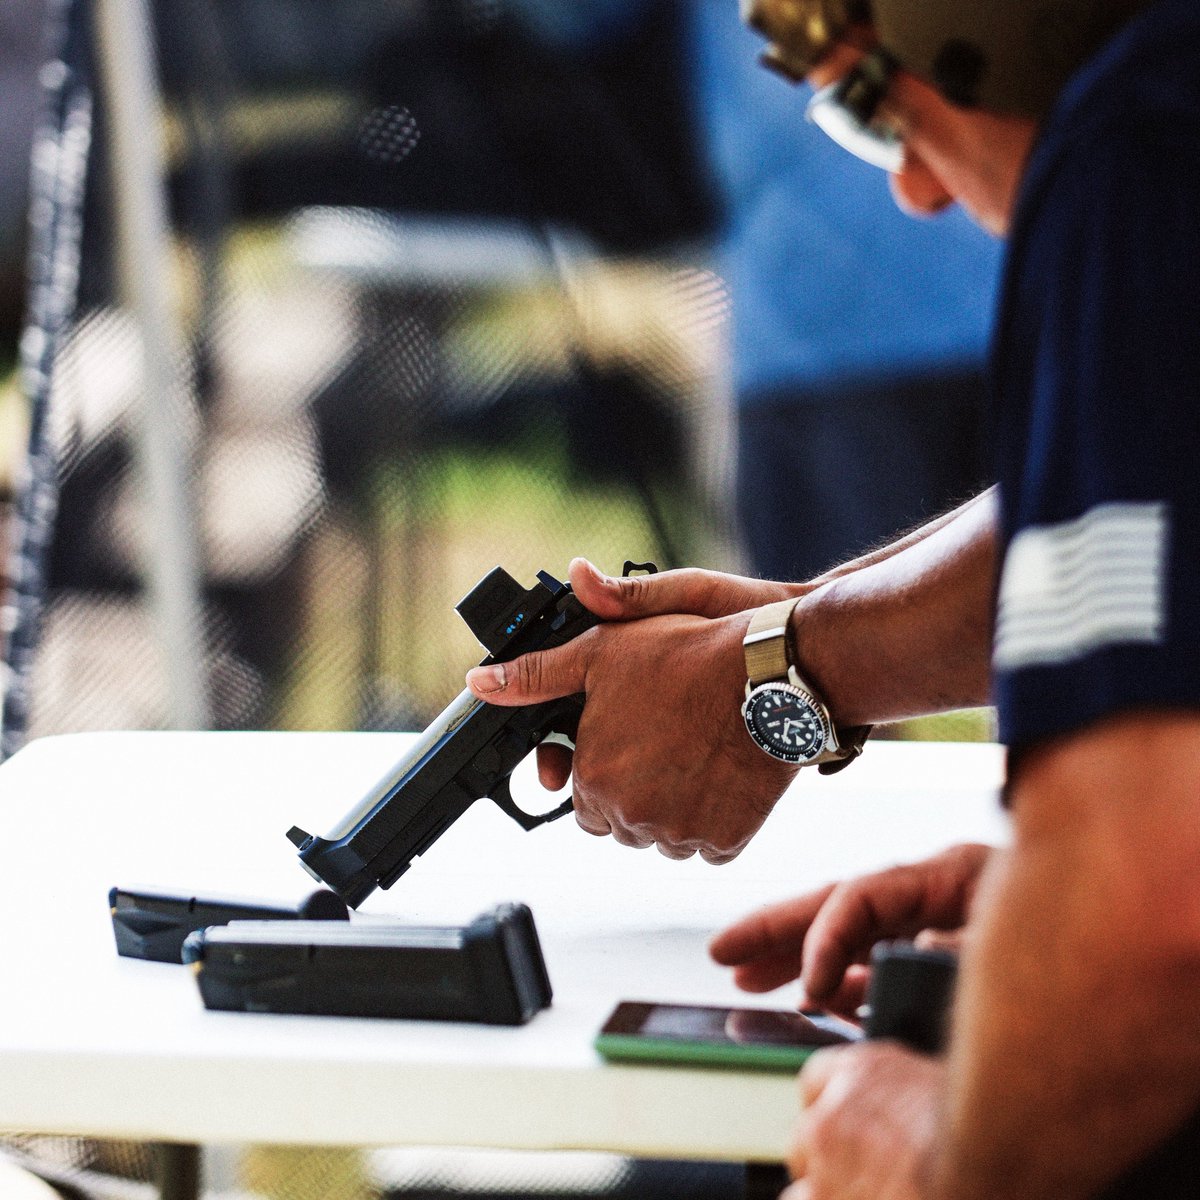 Shooting is a safe, fun activity enjoyed by millions of Americans! #LetsGoShooting